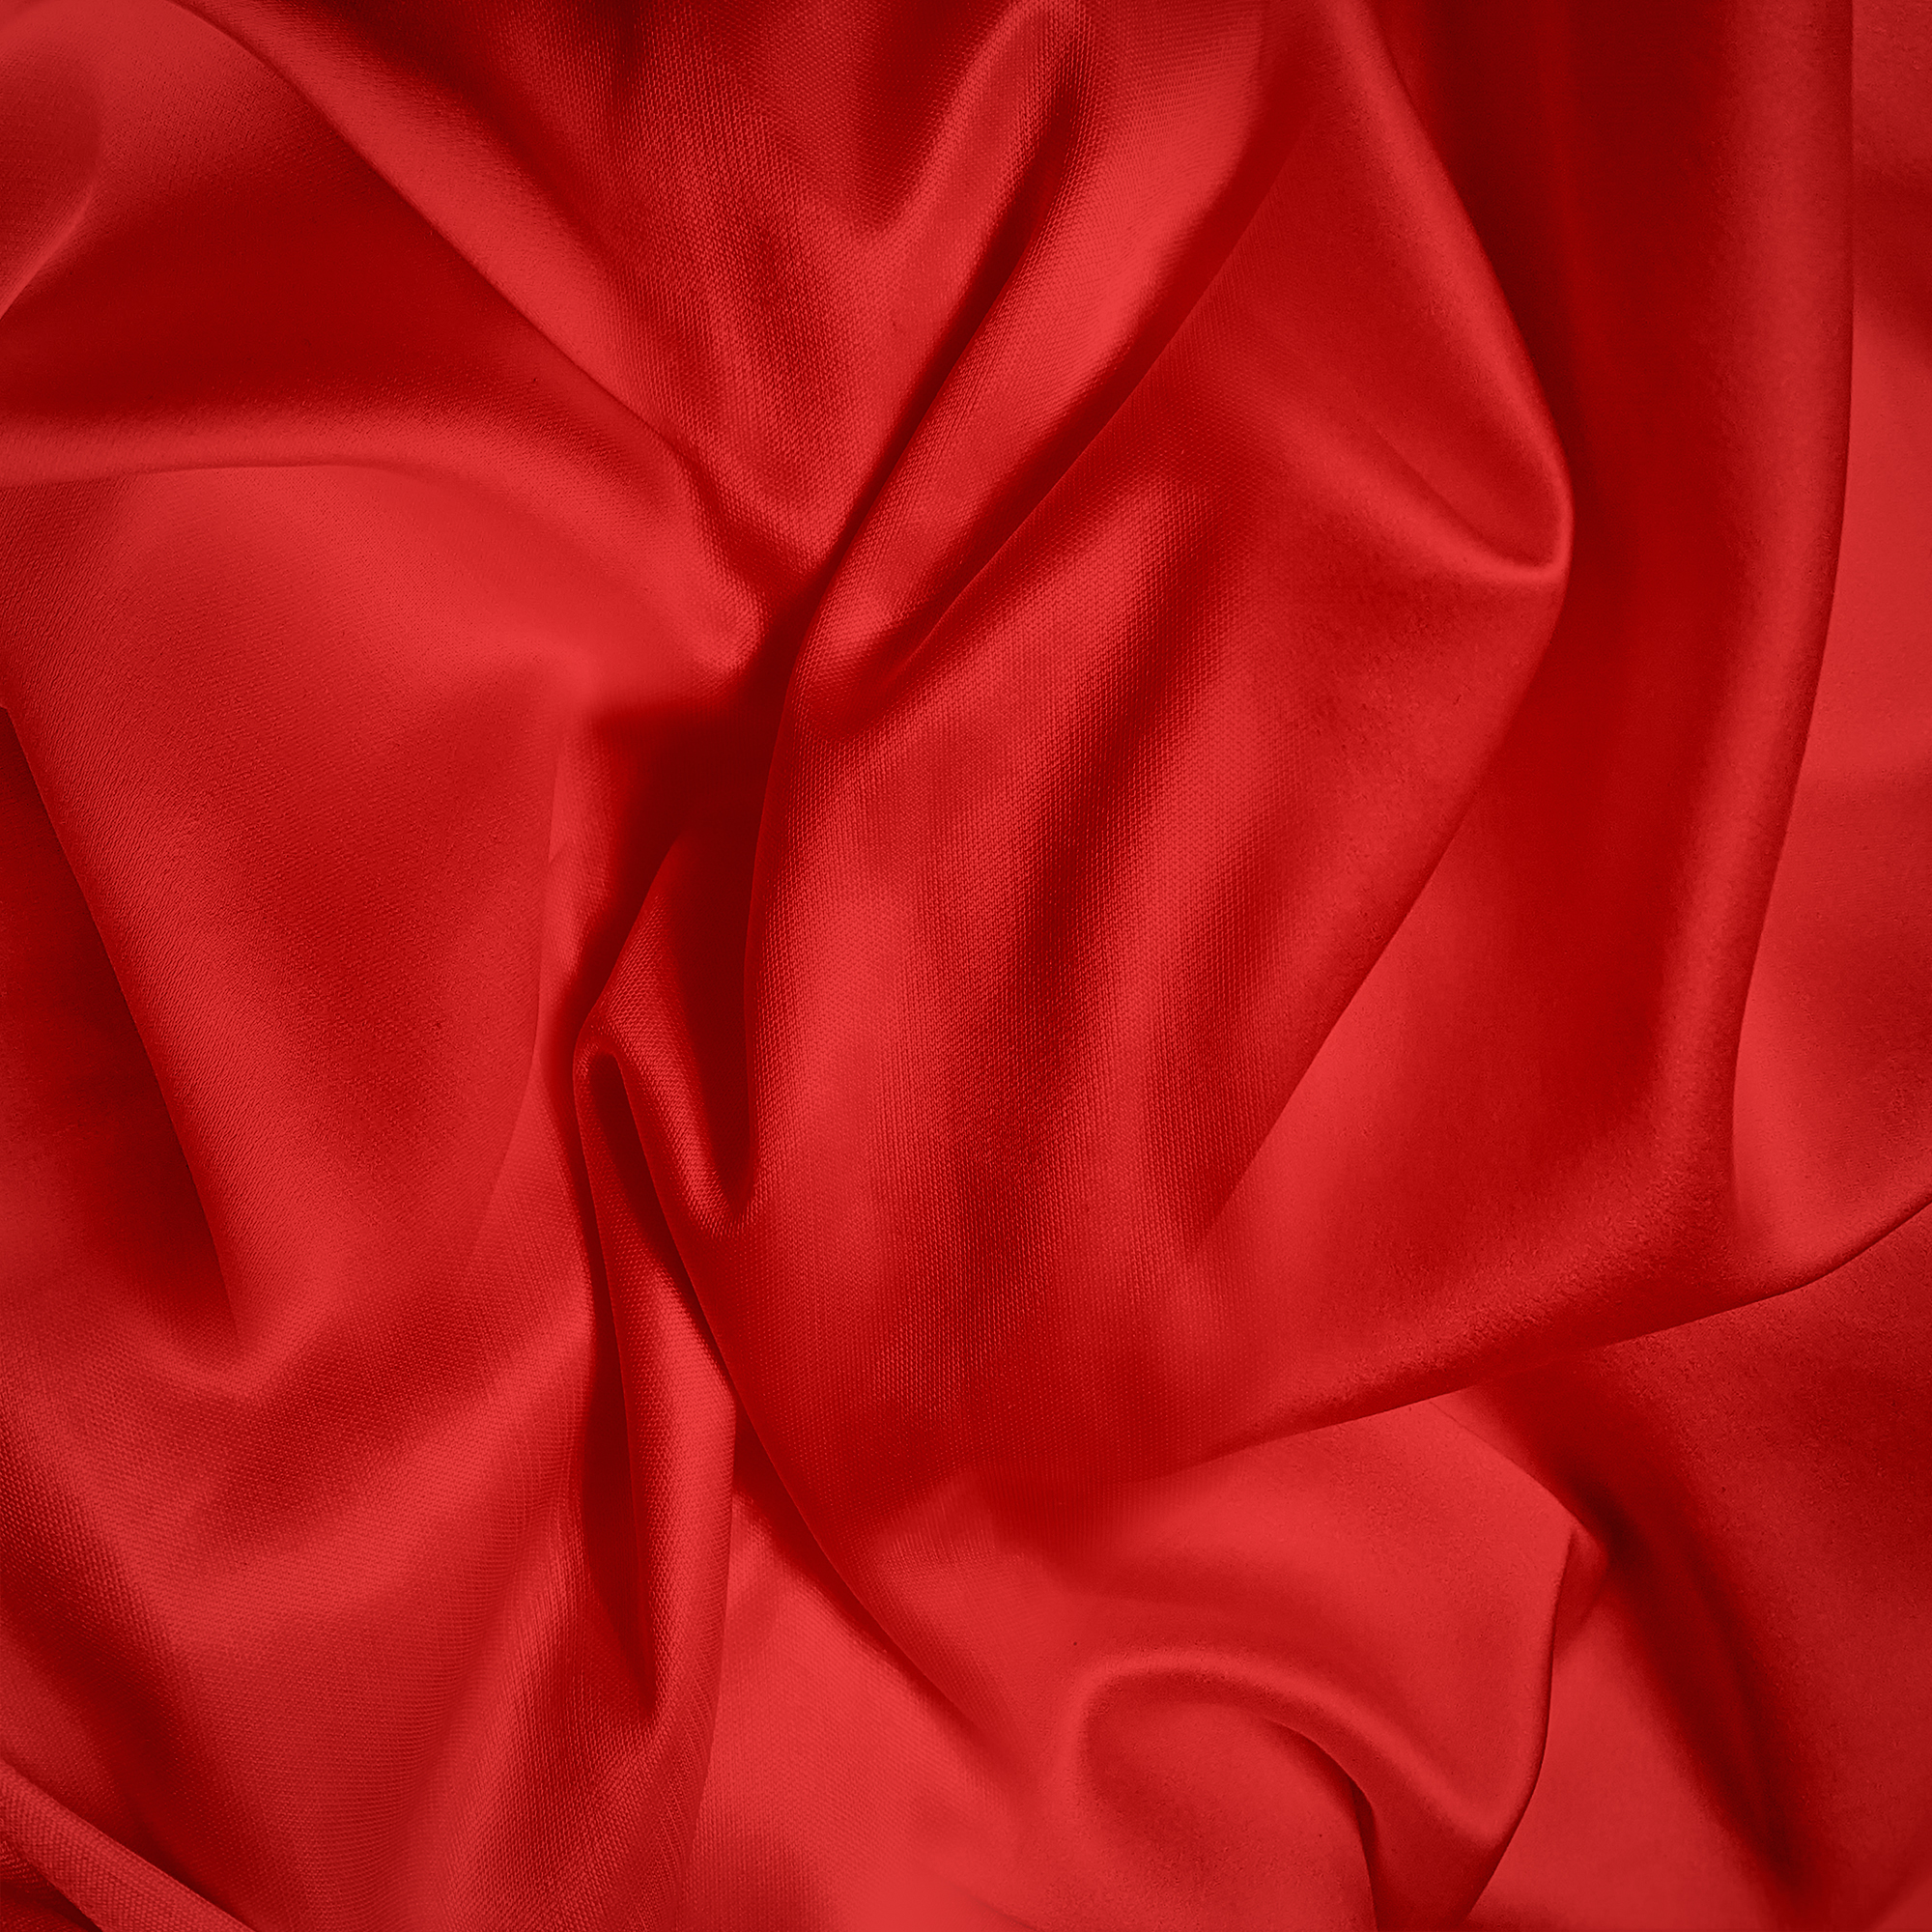 Red Wallpaper Images  Free Photos, PNG Stickers, Wallpapers